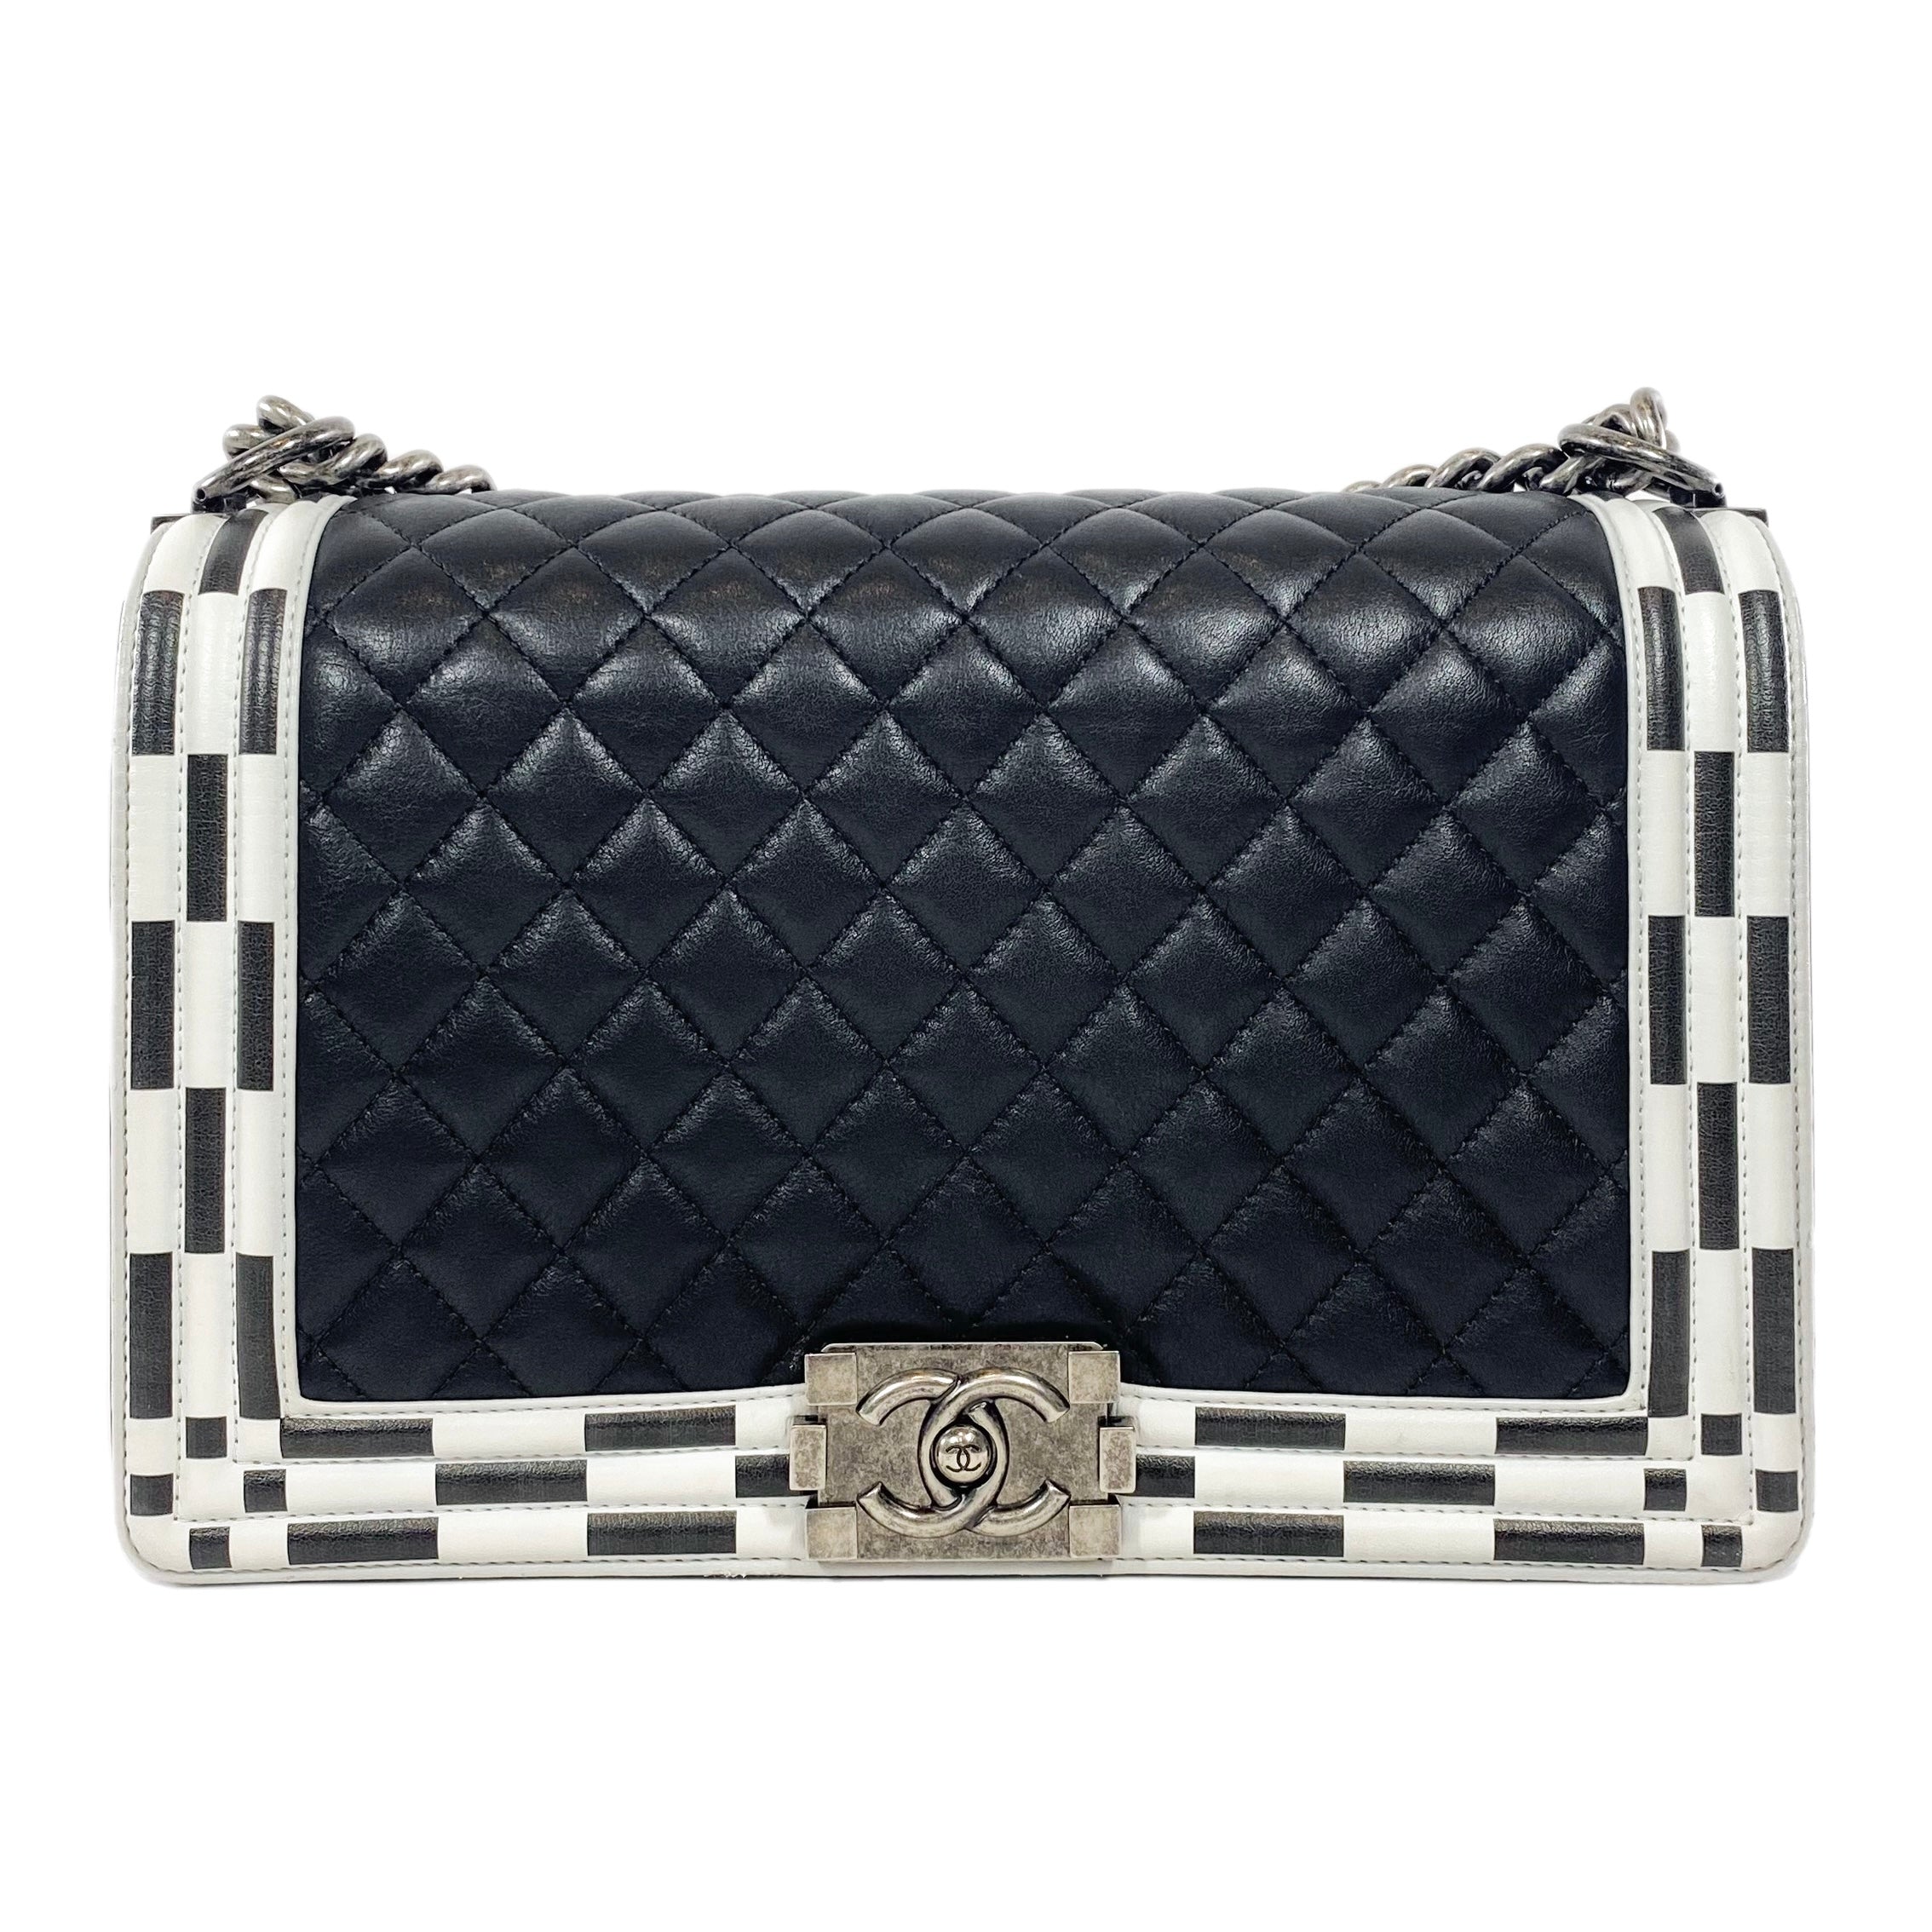 Chanel Black and White Quilted Calfskin New Medium Checkerboard Boy Flap Bag